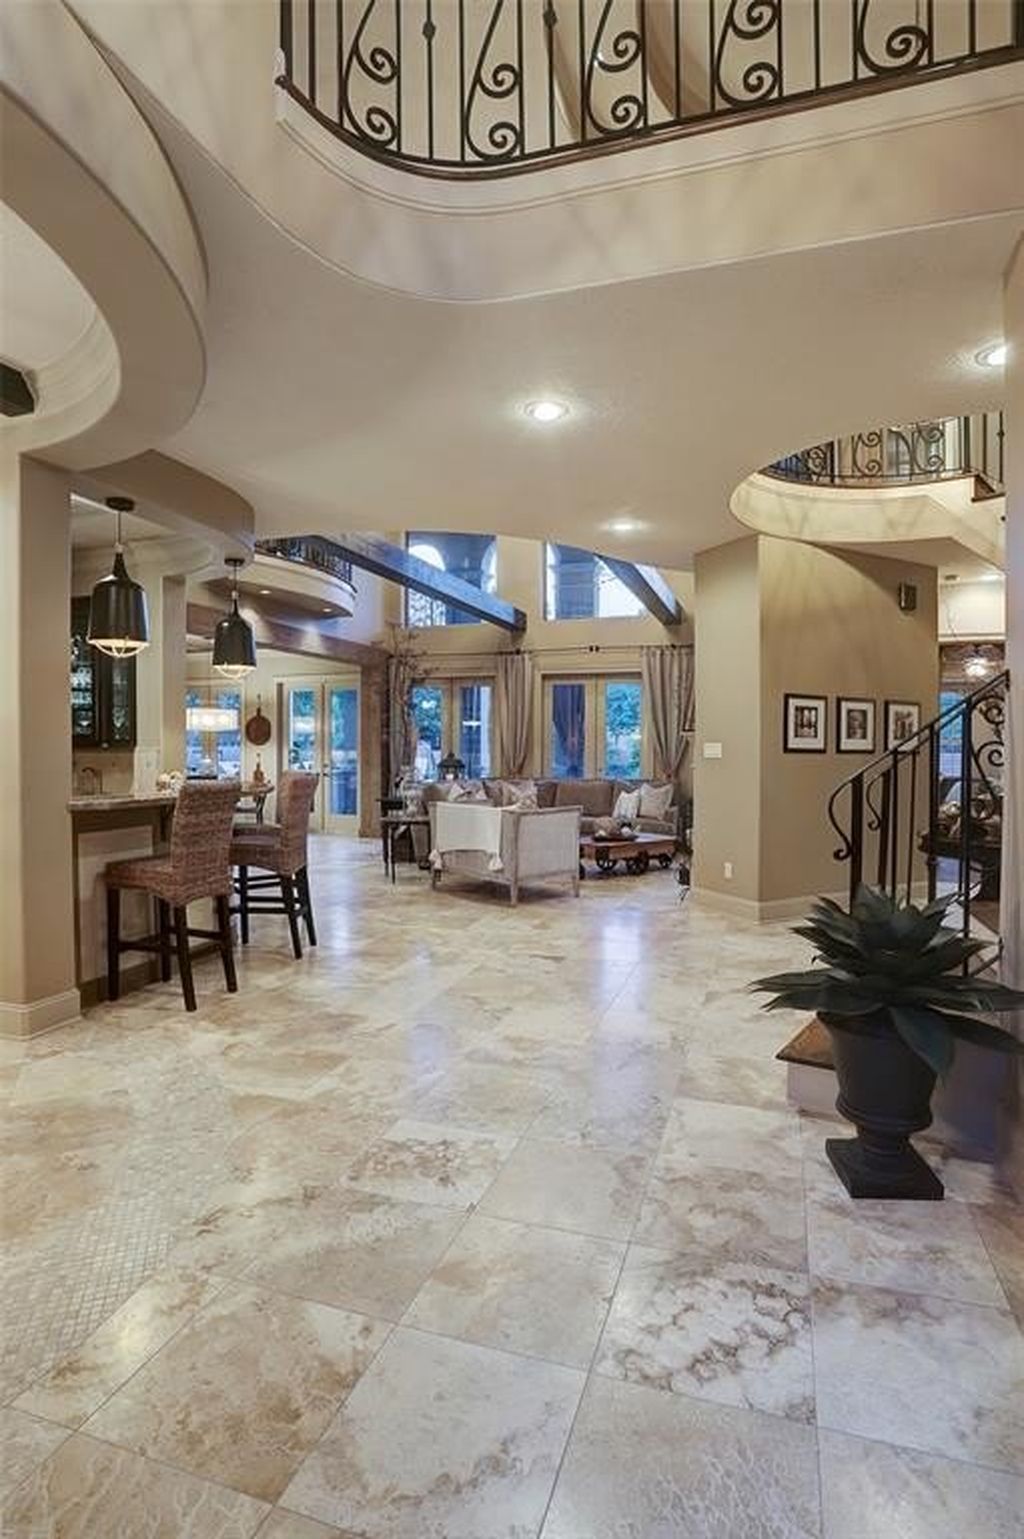 Embrace luxury mediterranean masterpiece awaits in gated cinco ranch katy texas listed at 1. 549 million 6